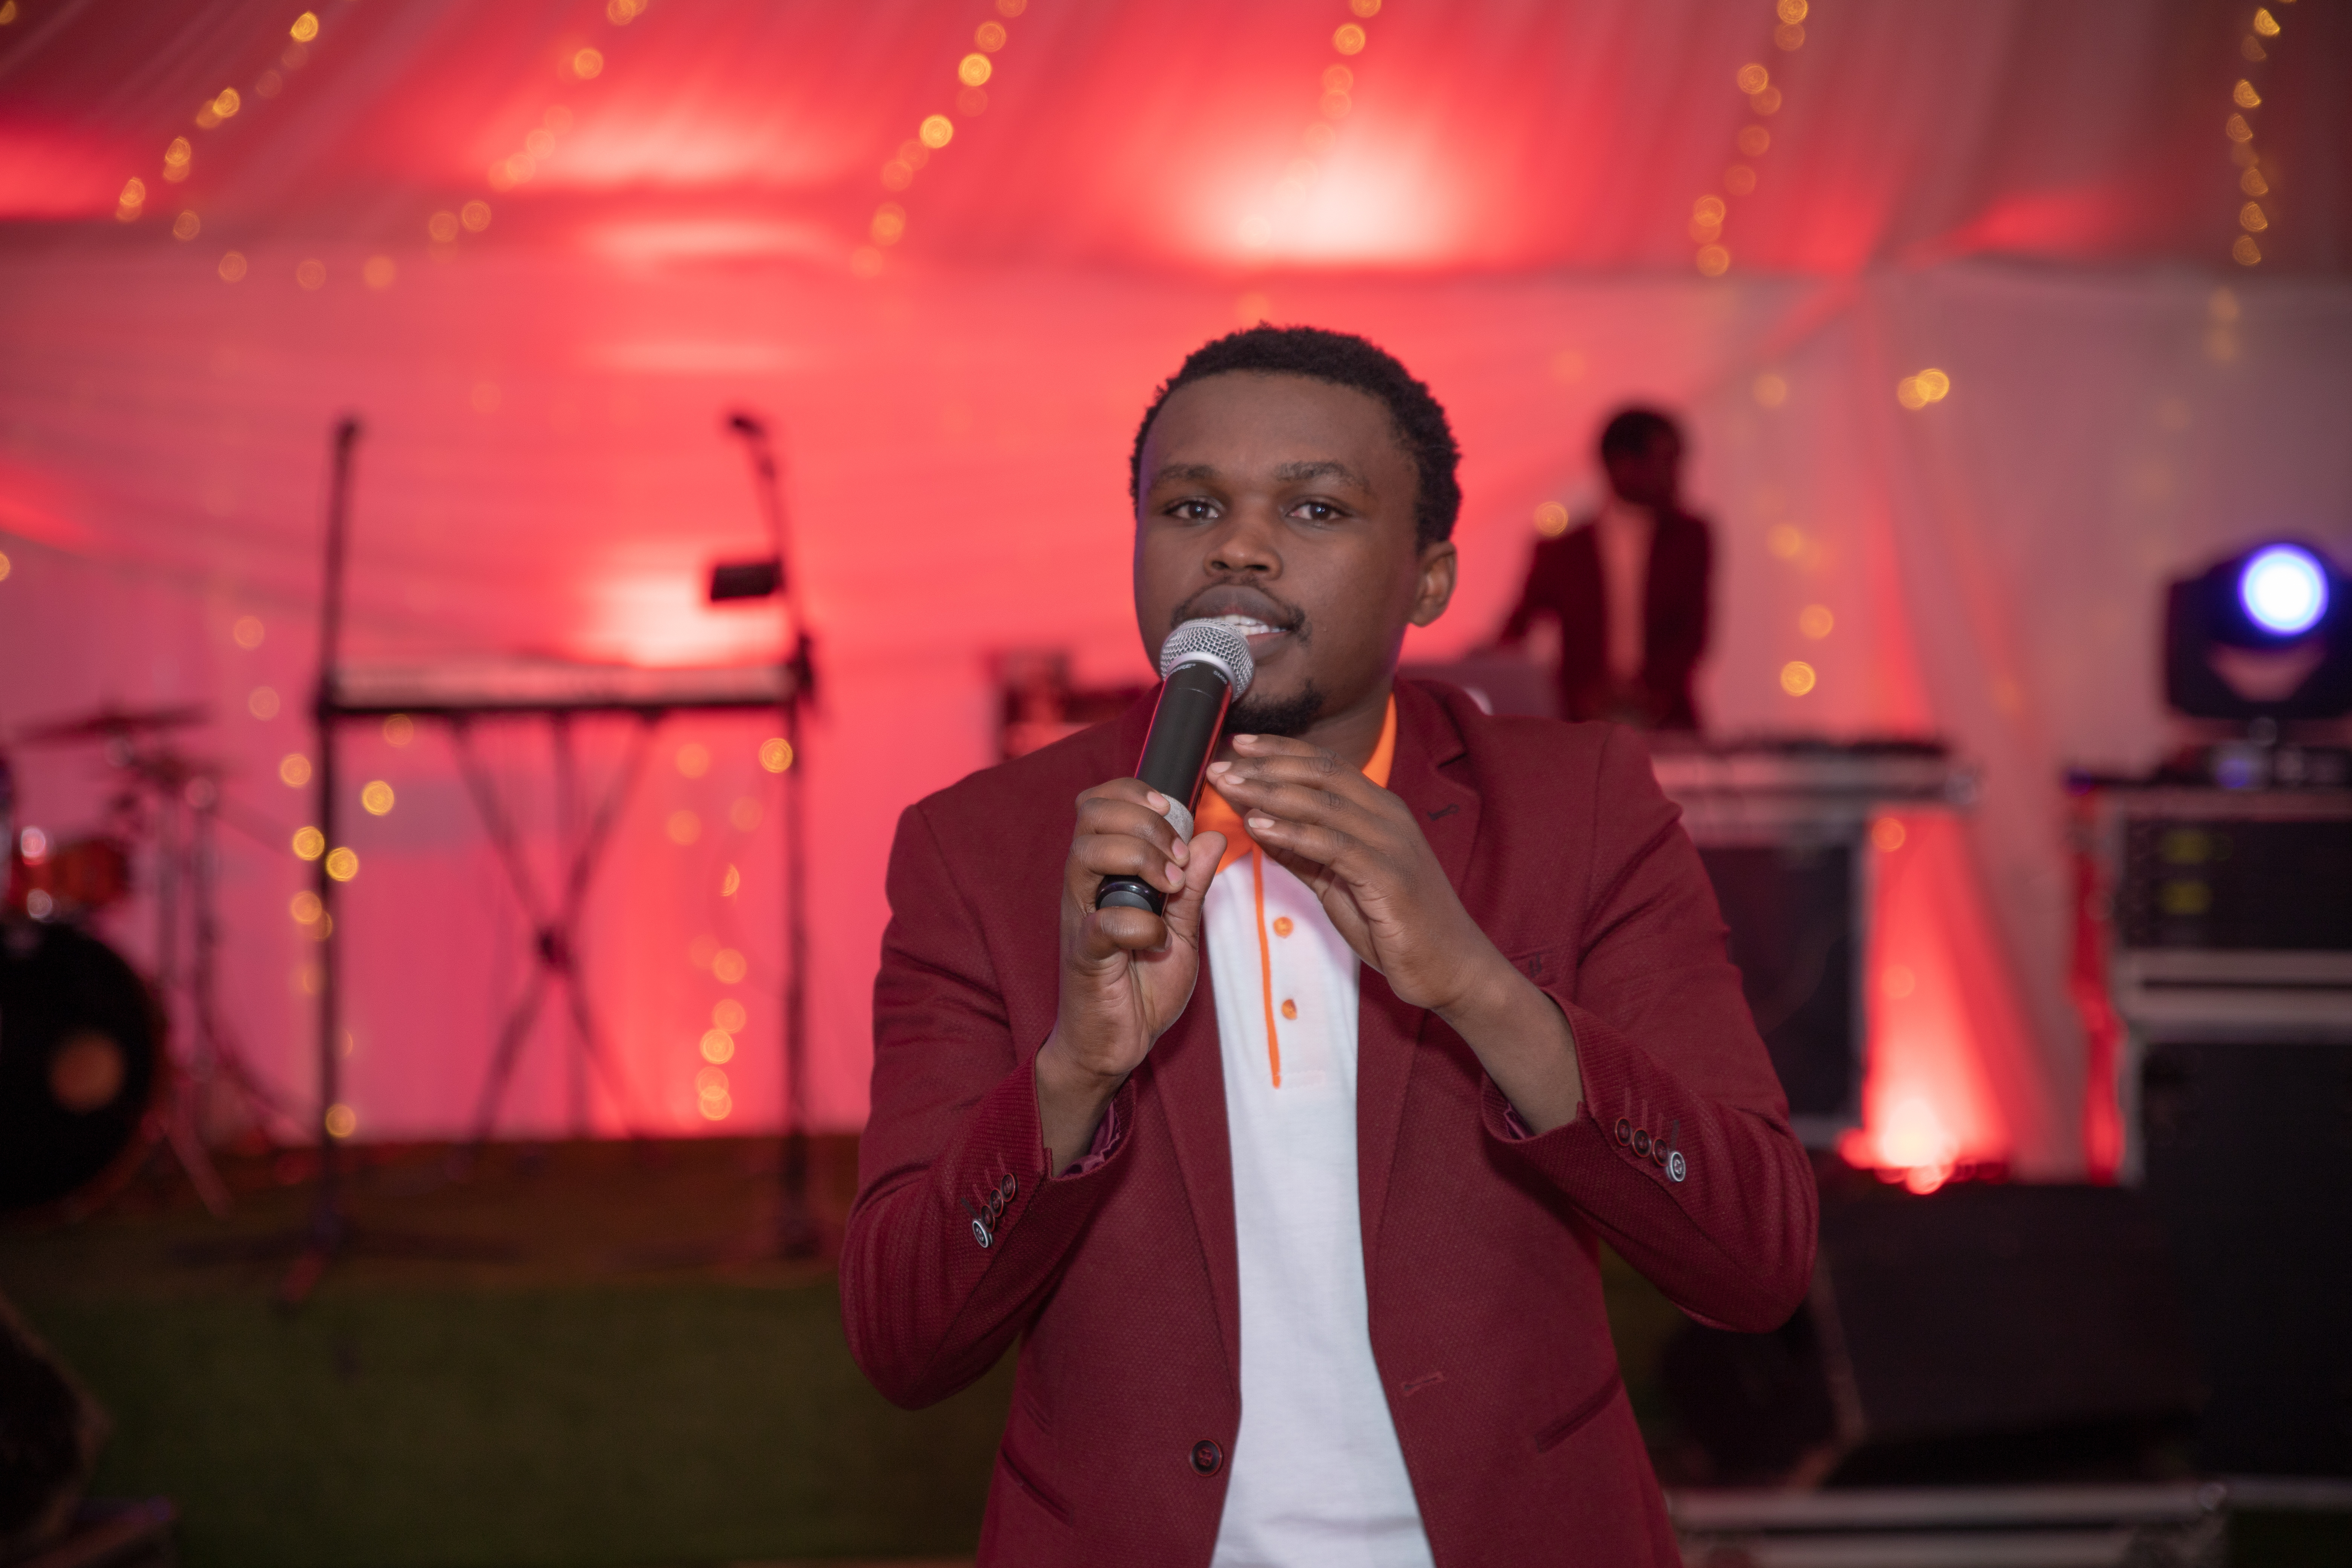 The Comedian, who hadn't been publicized for this event was a surprise for the guests who graced the launch of Kigali's Royal Fm's new Studios, an event which took place on October 5 in Kigali.